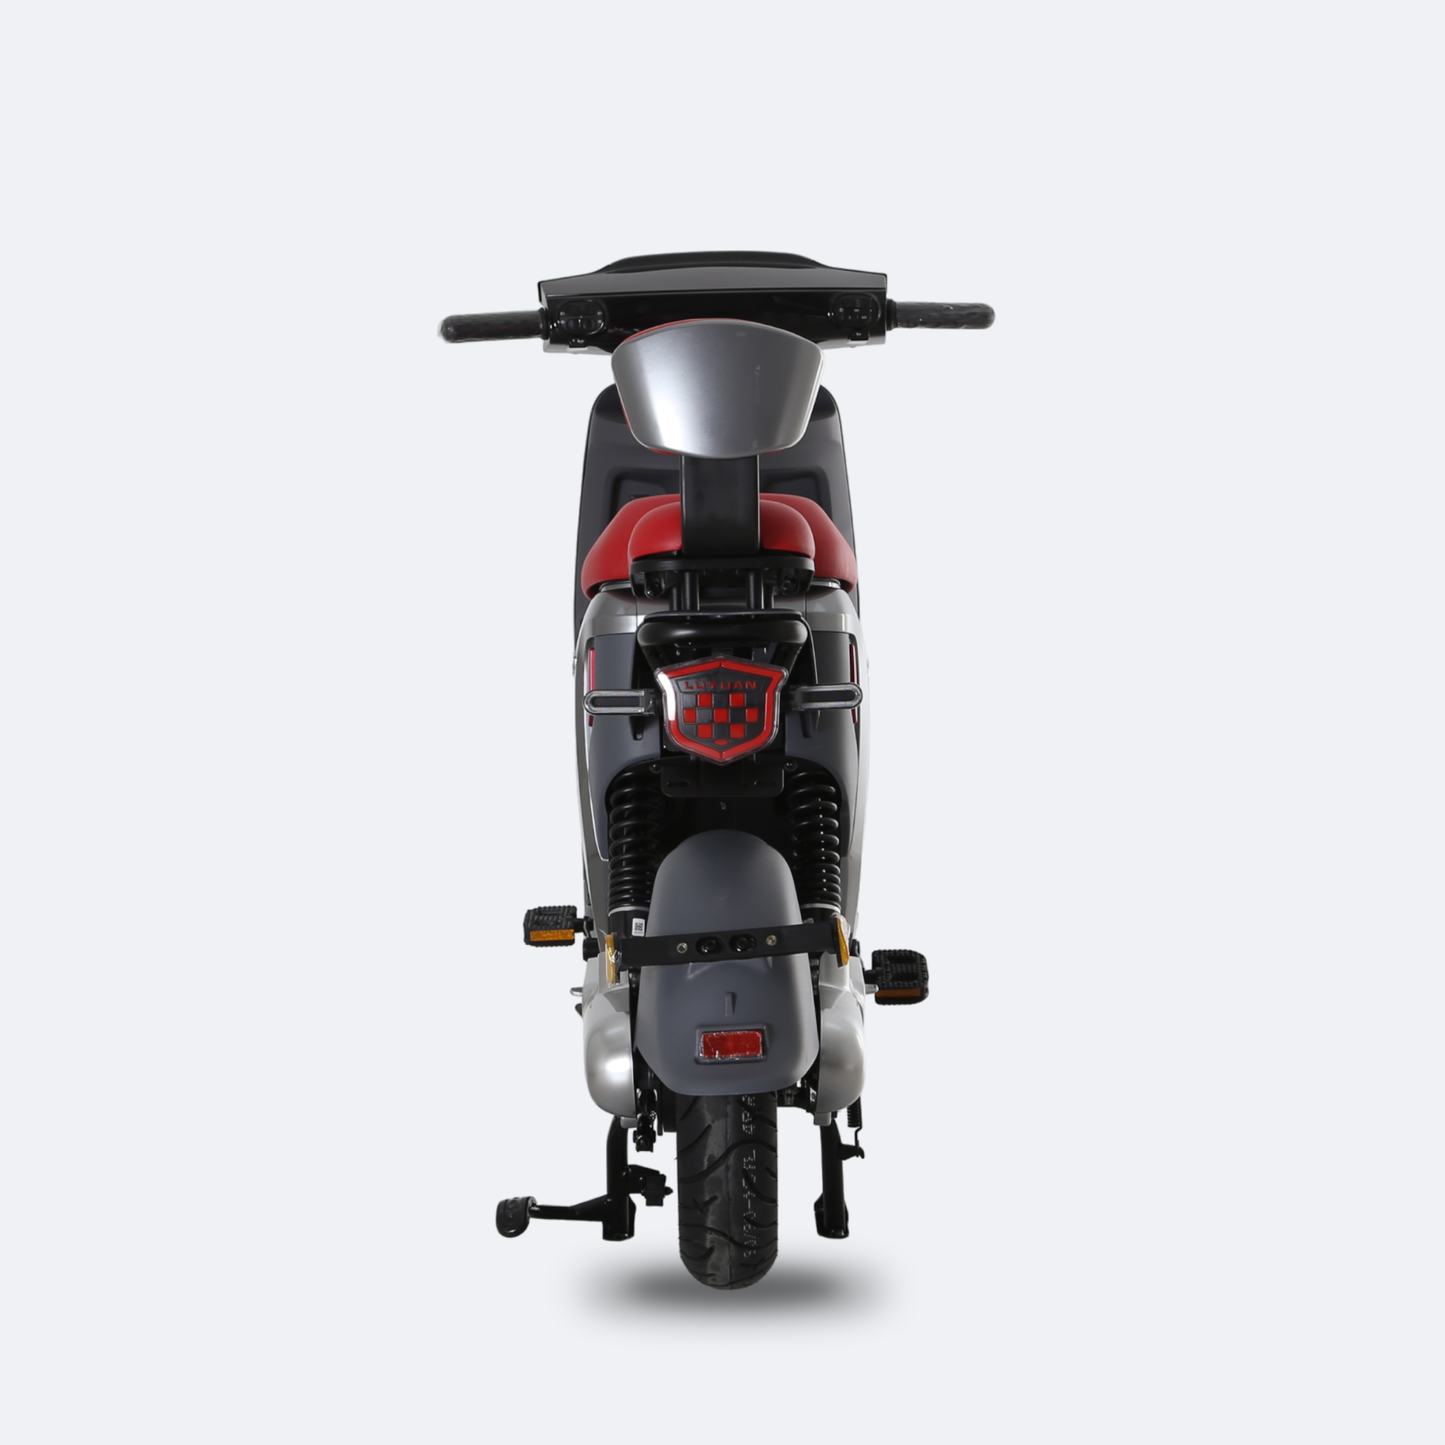 INNO-A 2024 Lithium Battery Moped style Class 2 E-bike